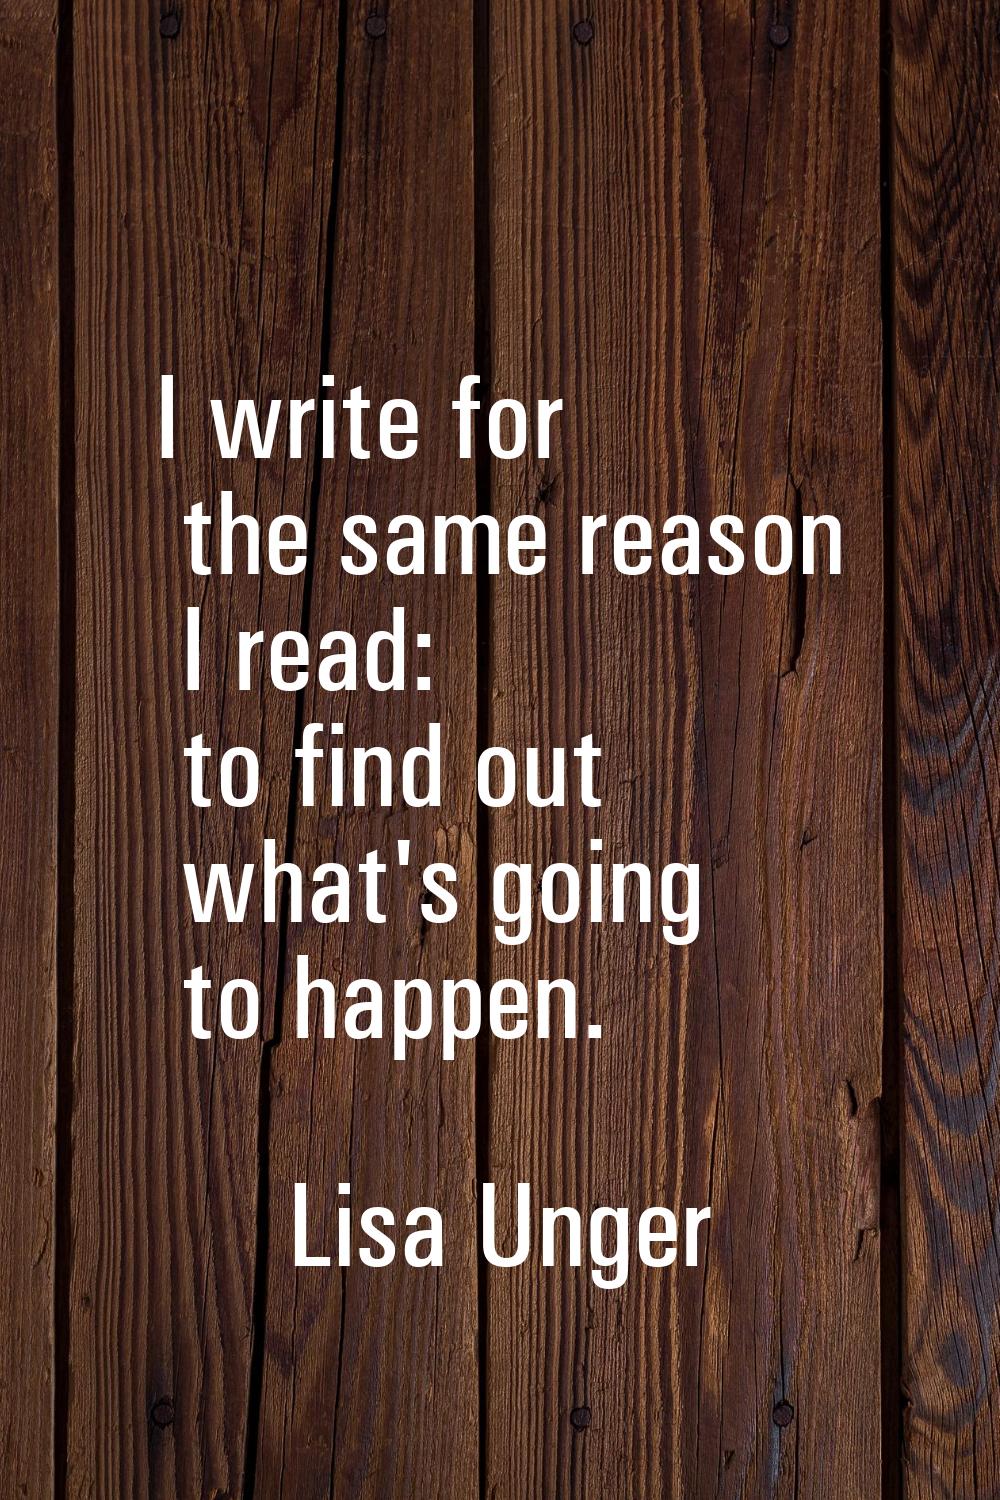 I write for the same reason I read: to find out what's going to happen.